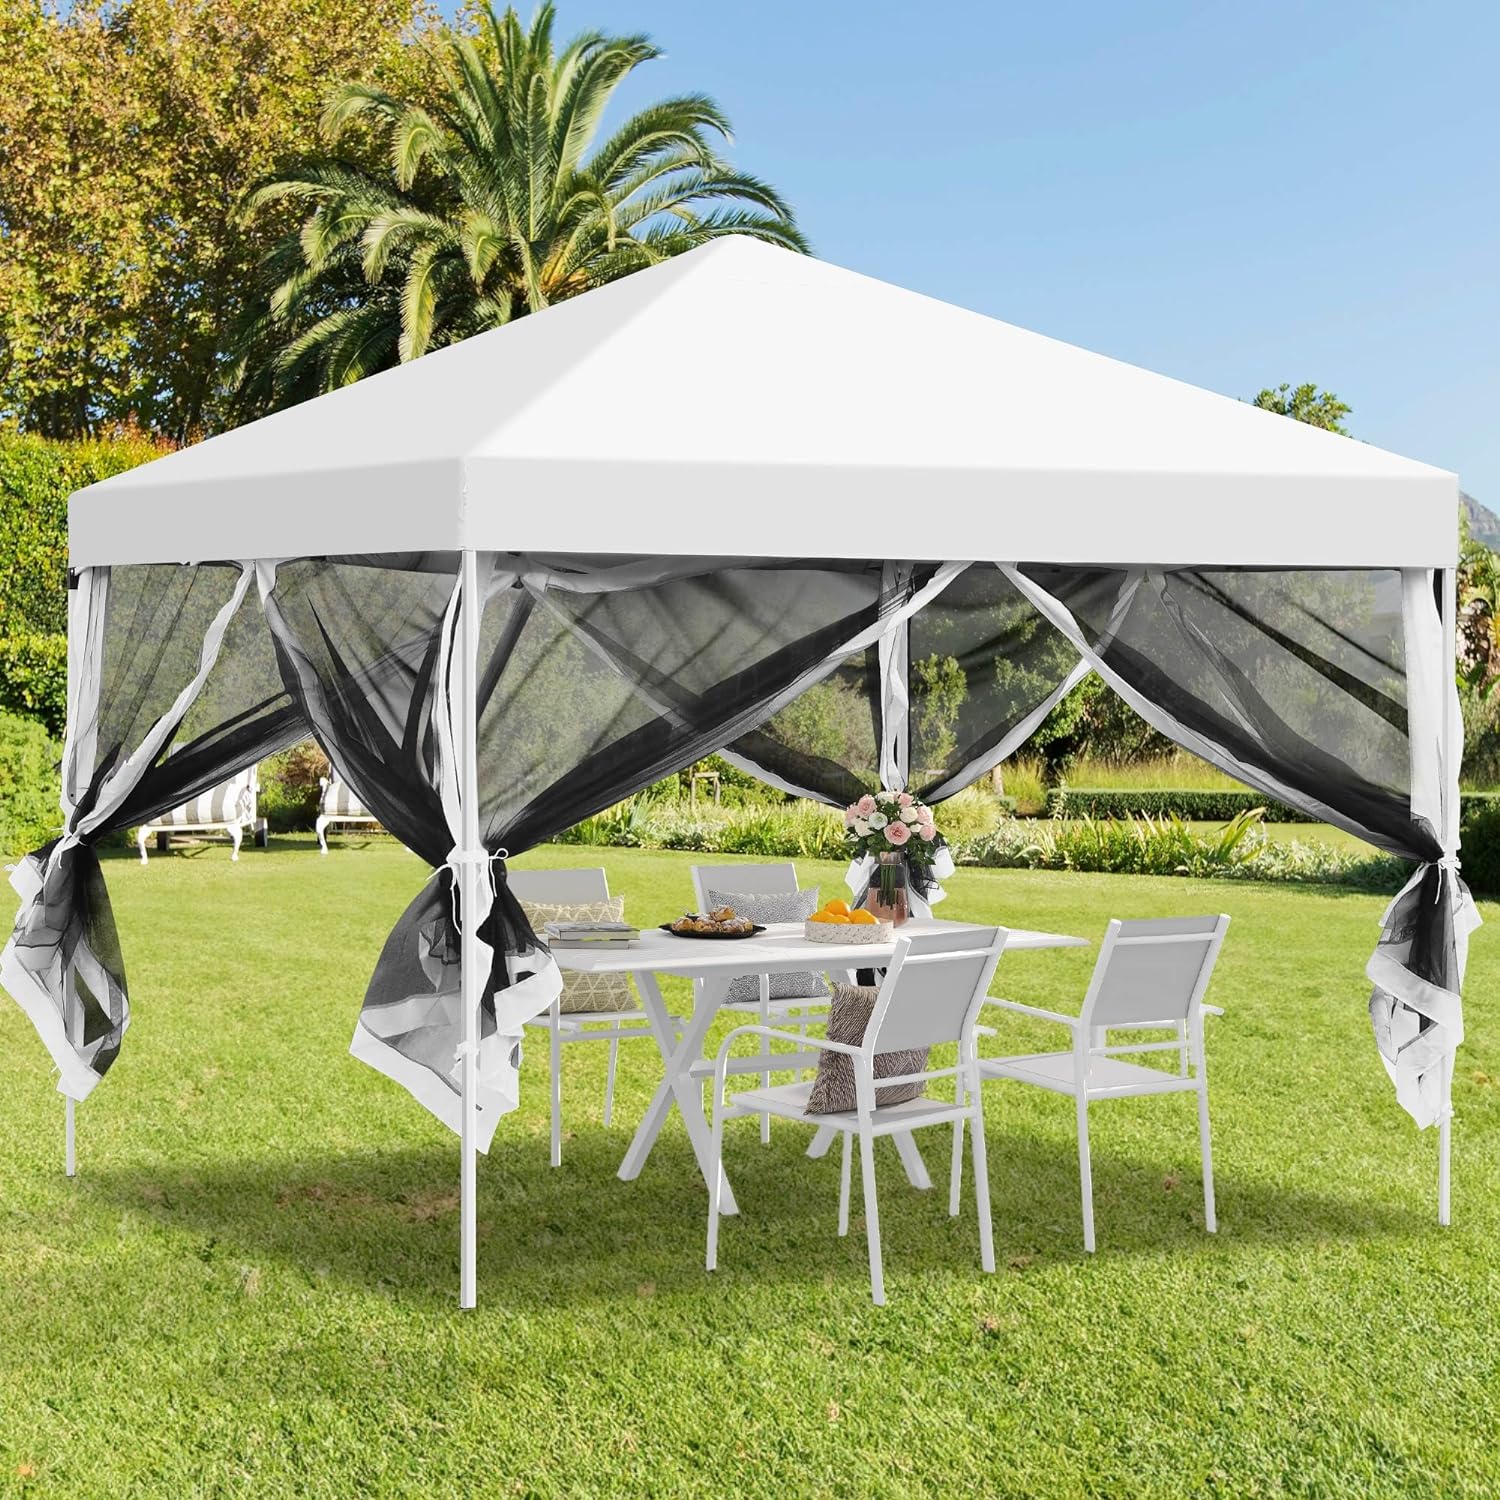 10x10 Pop Up Canopy Tent with Netting, Easy Set Up Outdoor Patio Canopy Screen House Room Tent